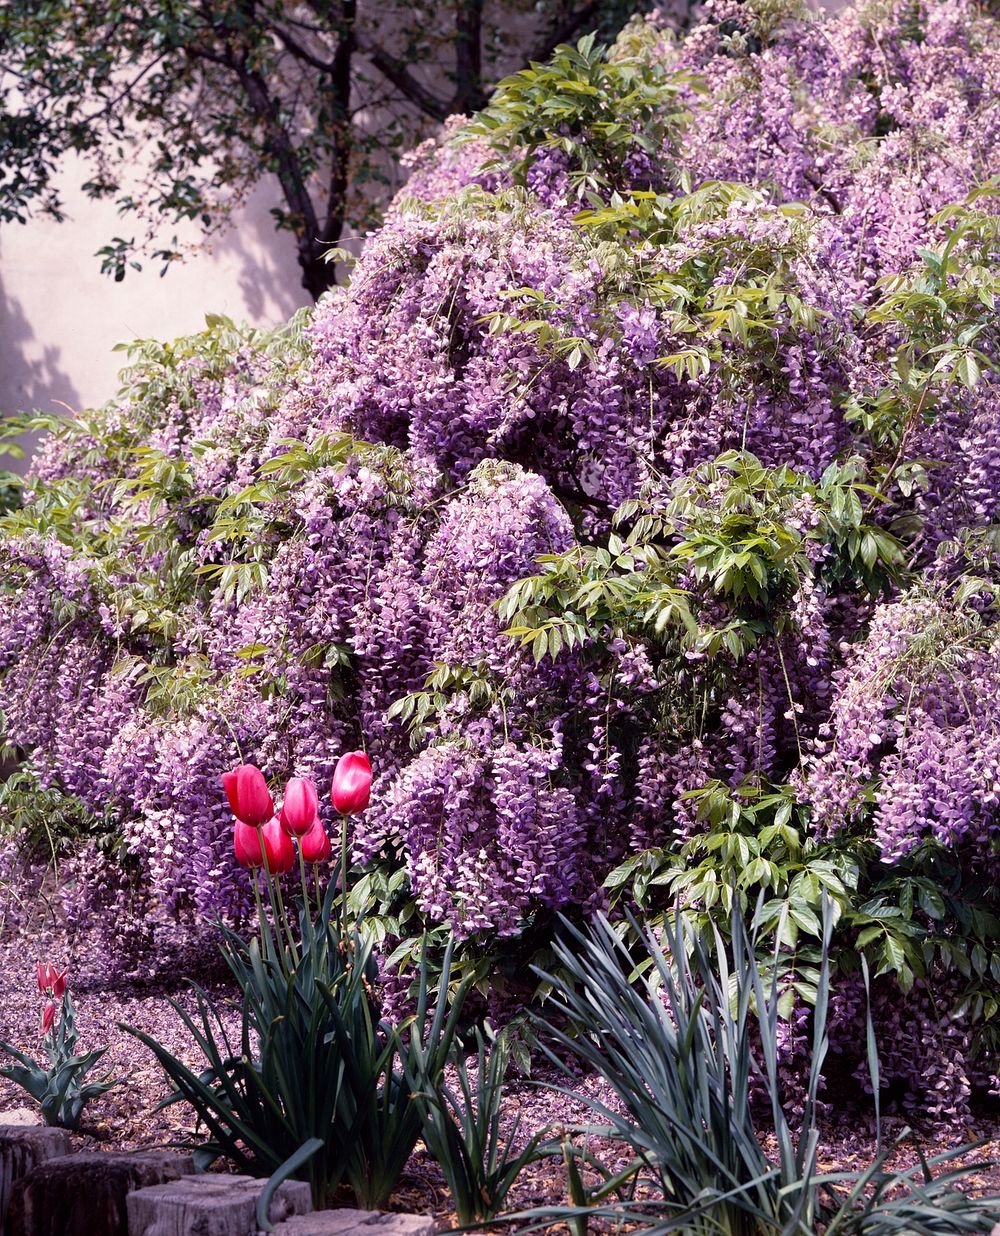 Spring Wisteria. Original image from Carol M. Highsmith&rsquo;s America, Library of Congress collection. Digitally enhanced…